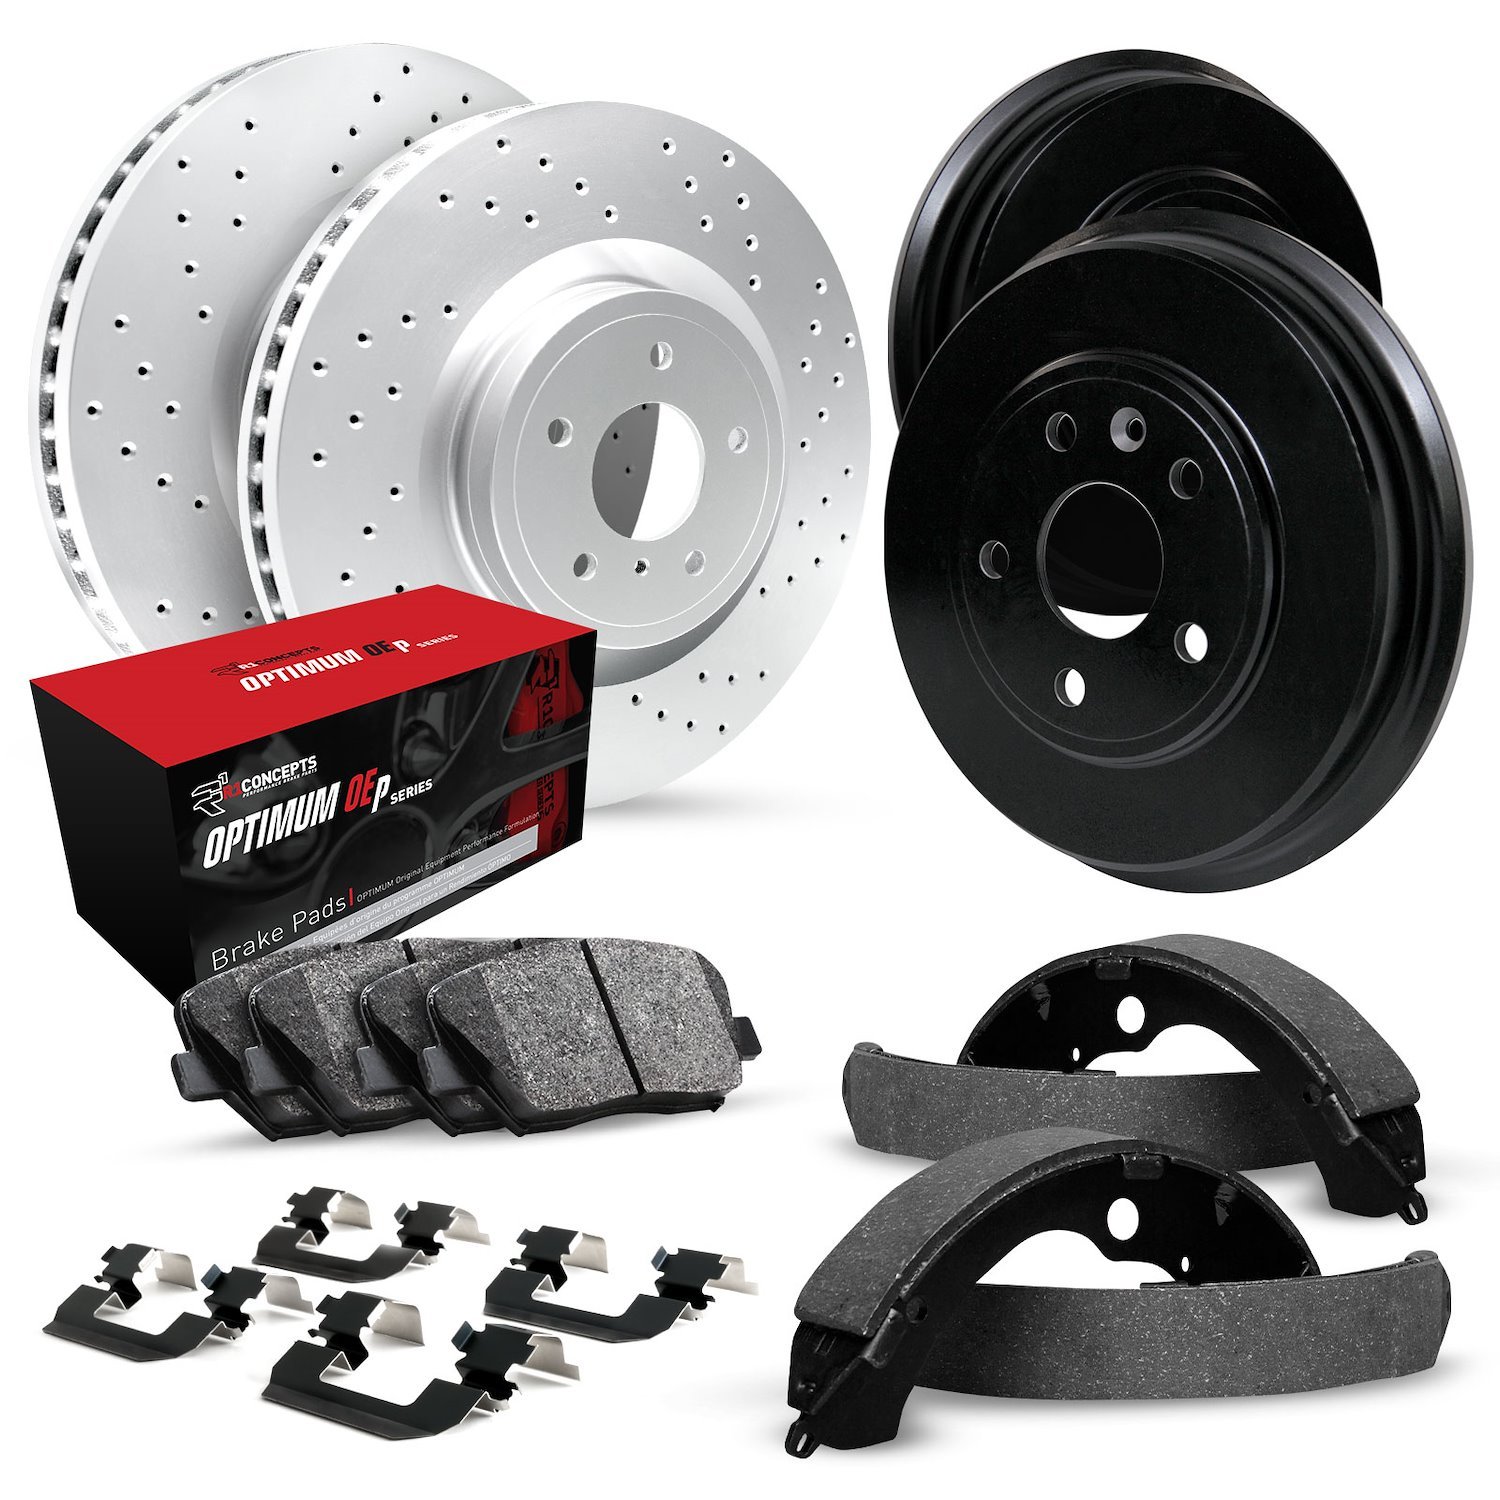 GEO-Carbon Drilled Brake Rotor & Drum Set w/Optimum OE Pads, Shoes, & Hardware, 1976-1978 GM, Position: Front & Rear